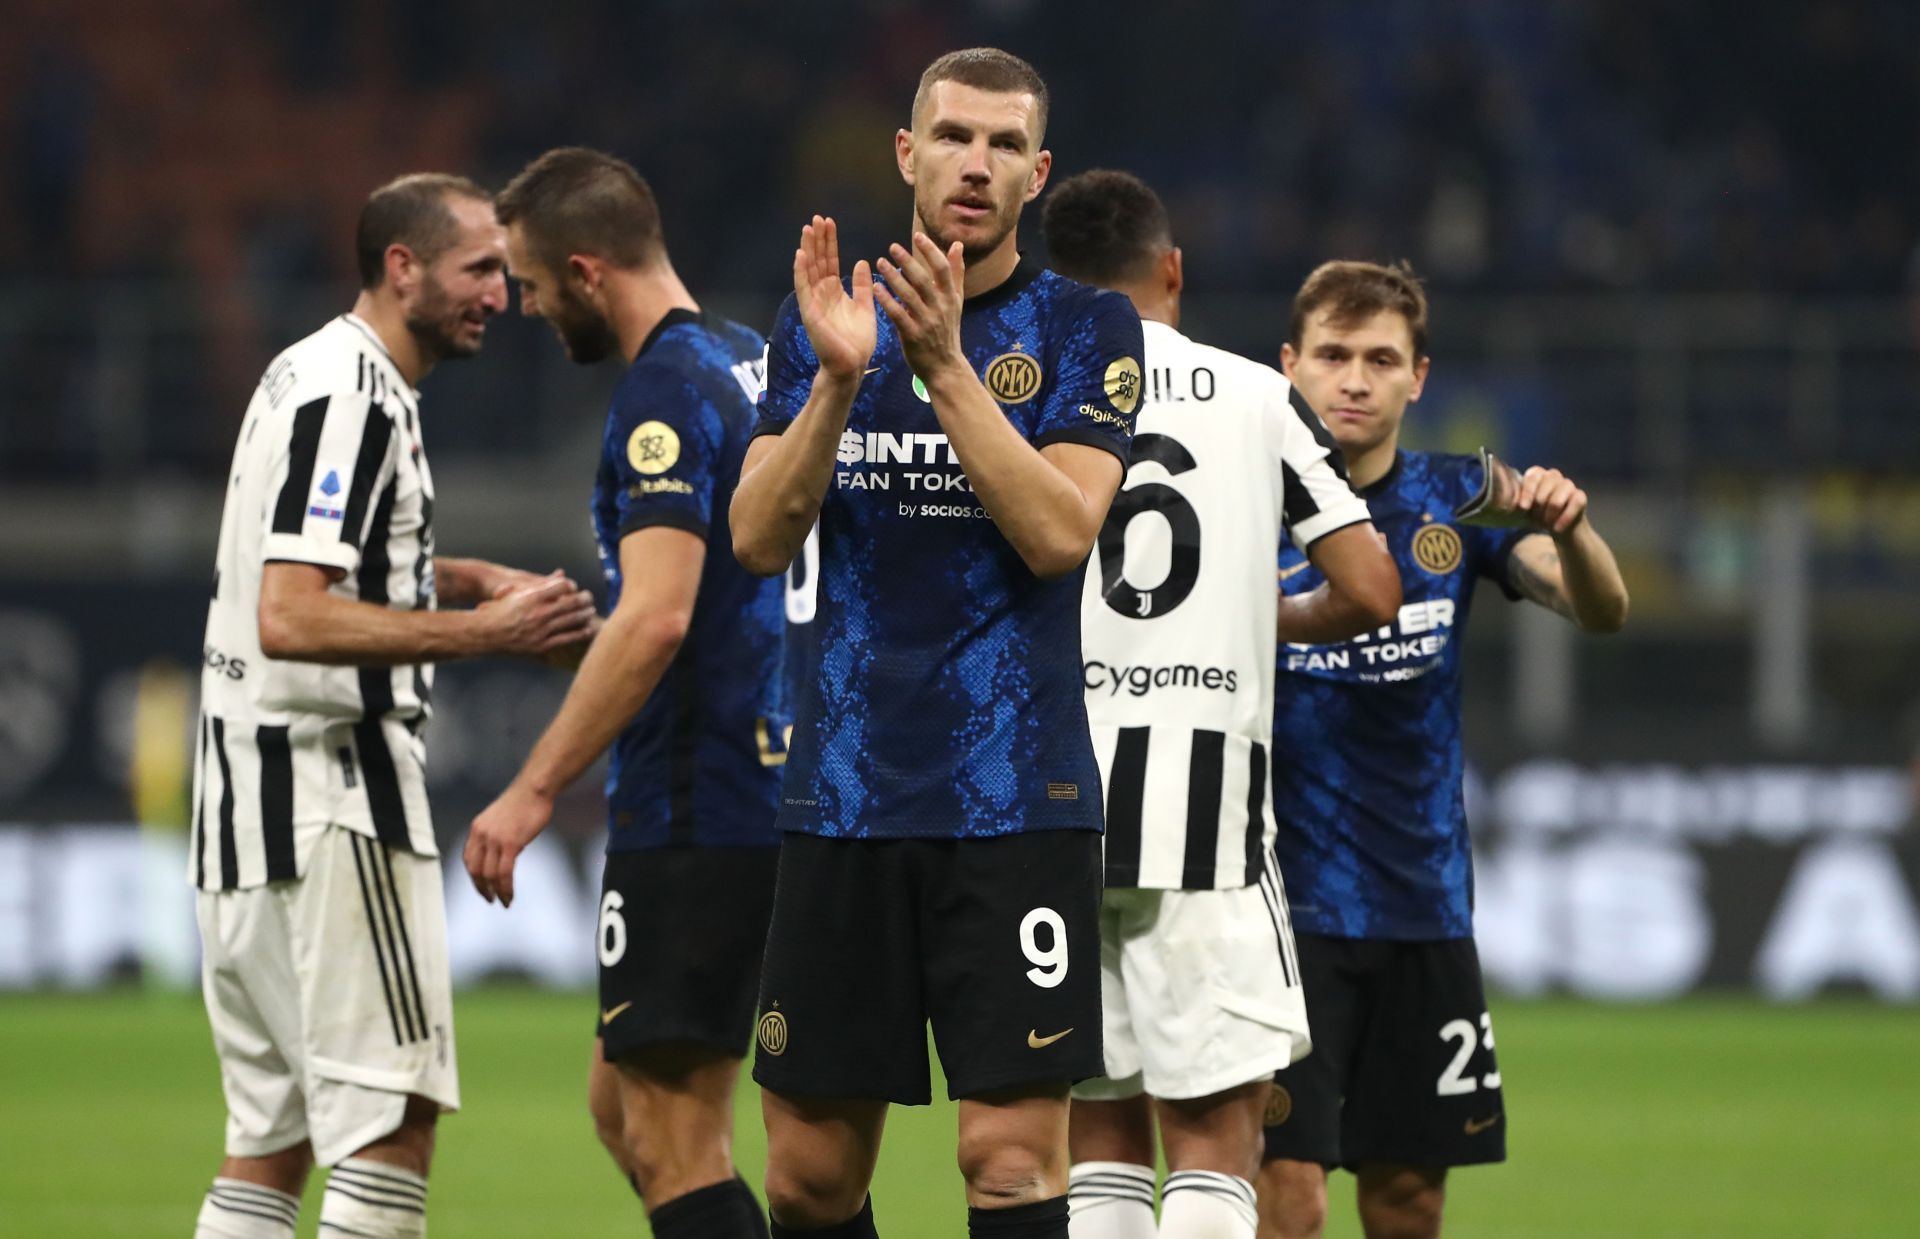 Inter Milan challenge reigning champions Juventus in the Supercoppa Italiana on Wednesday